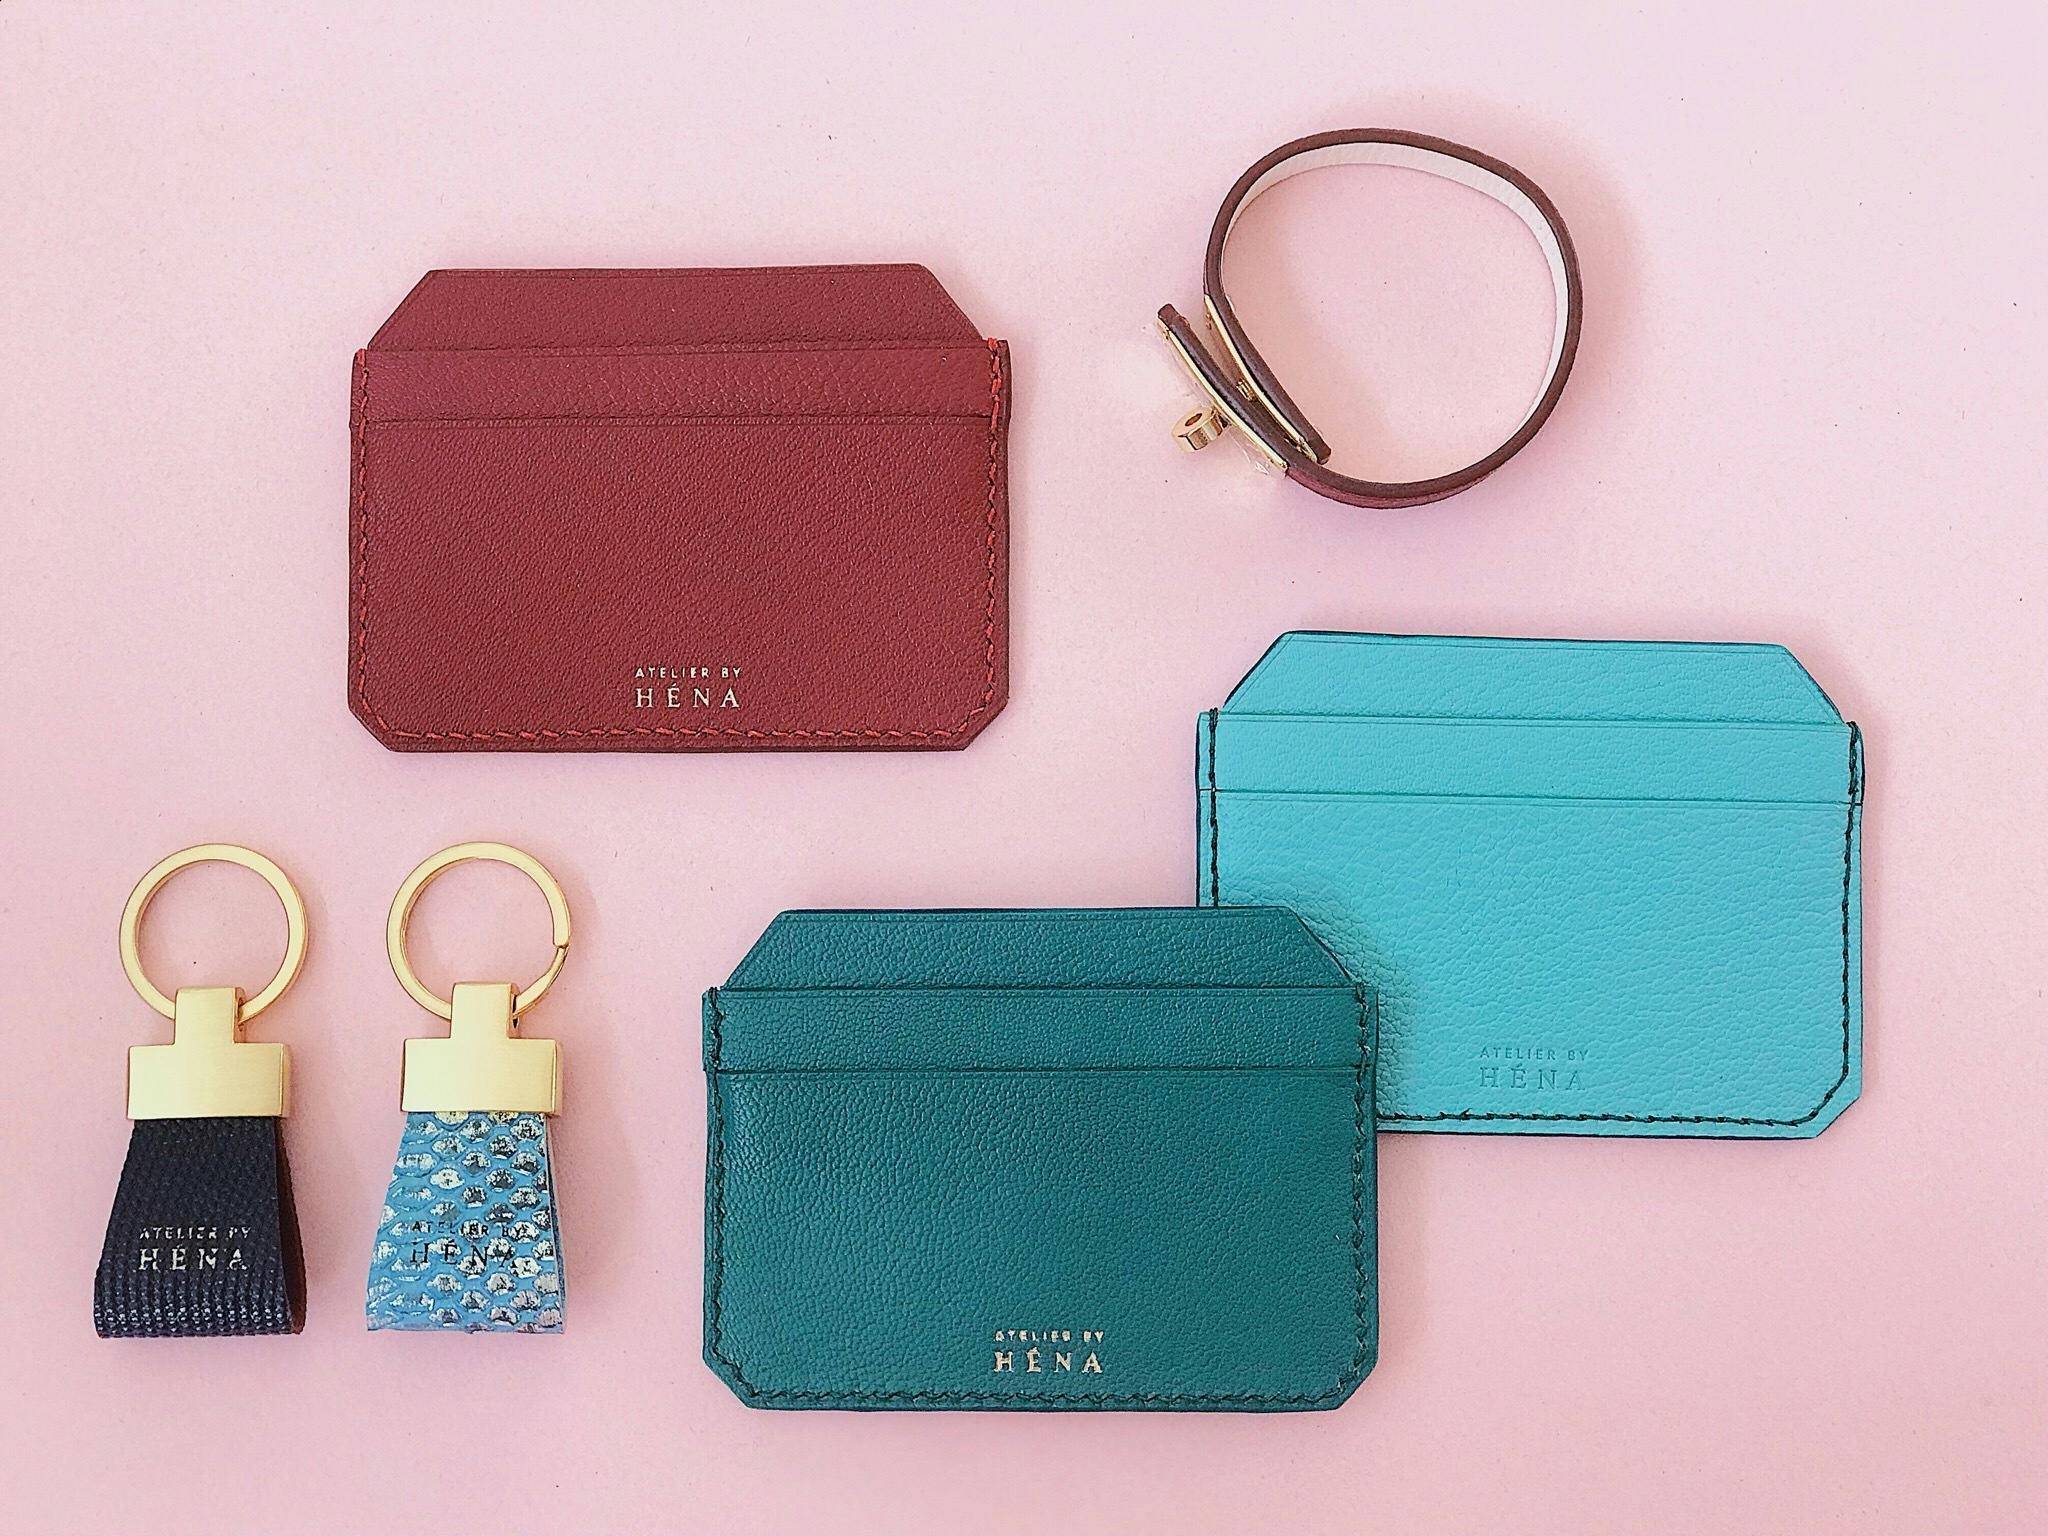 Assorted leather goods on pink: maroon card holder, two keychains, dark turquoise wallet, teal card holder, and a thin brown belt.